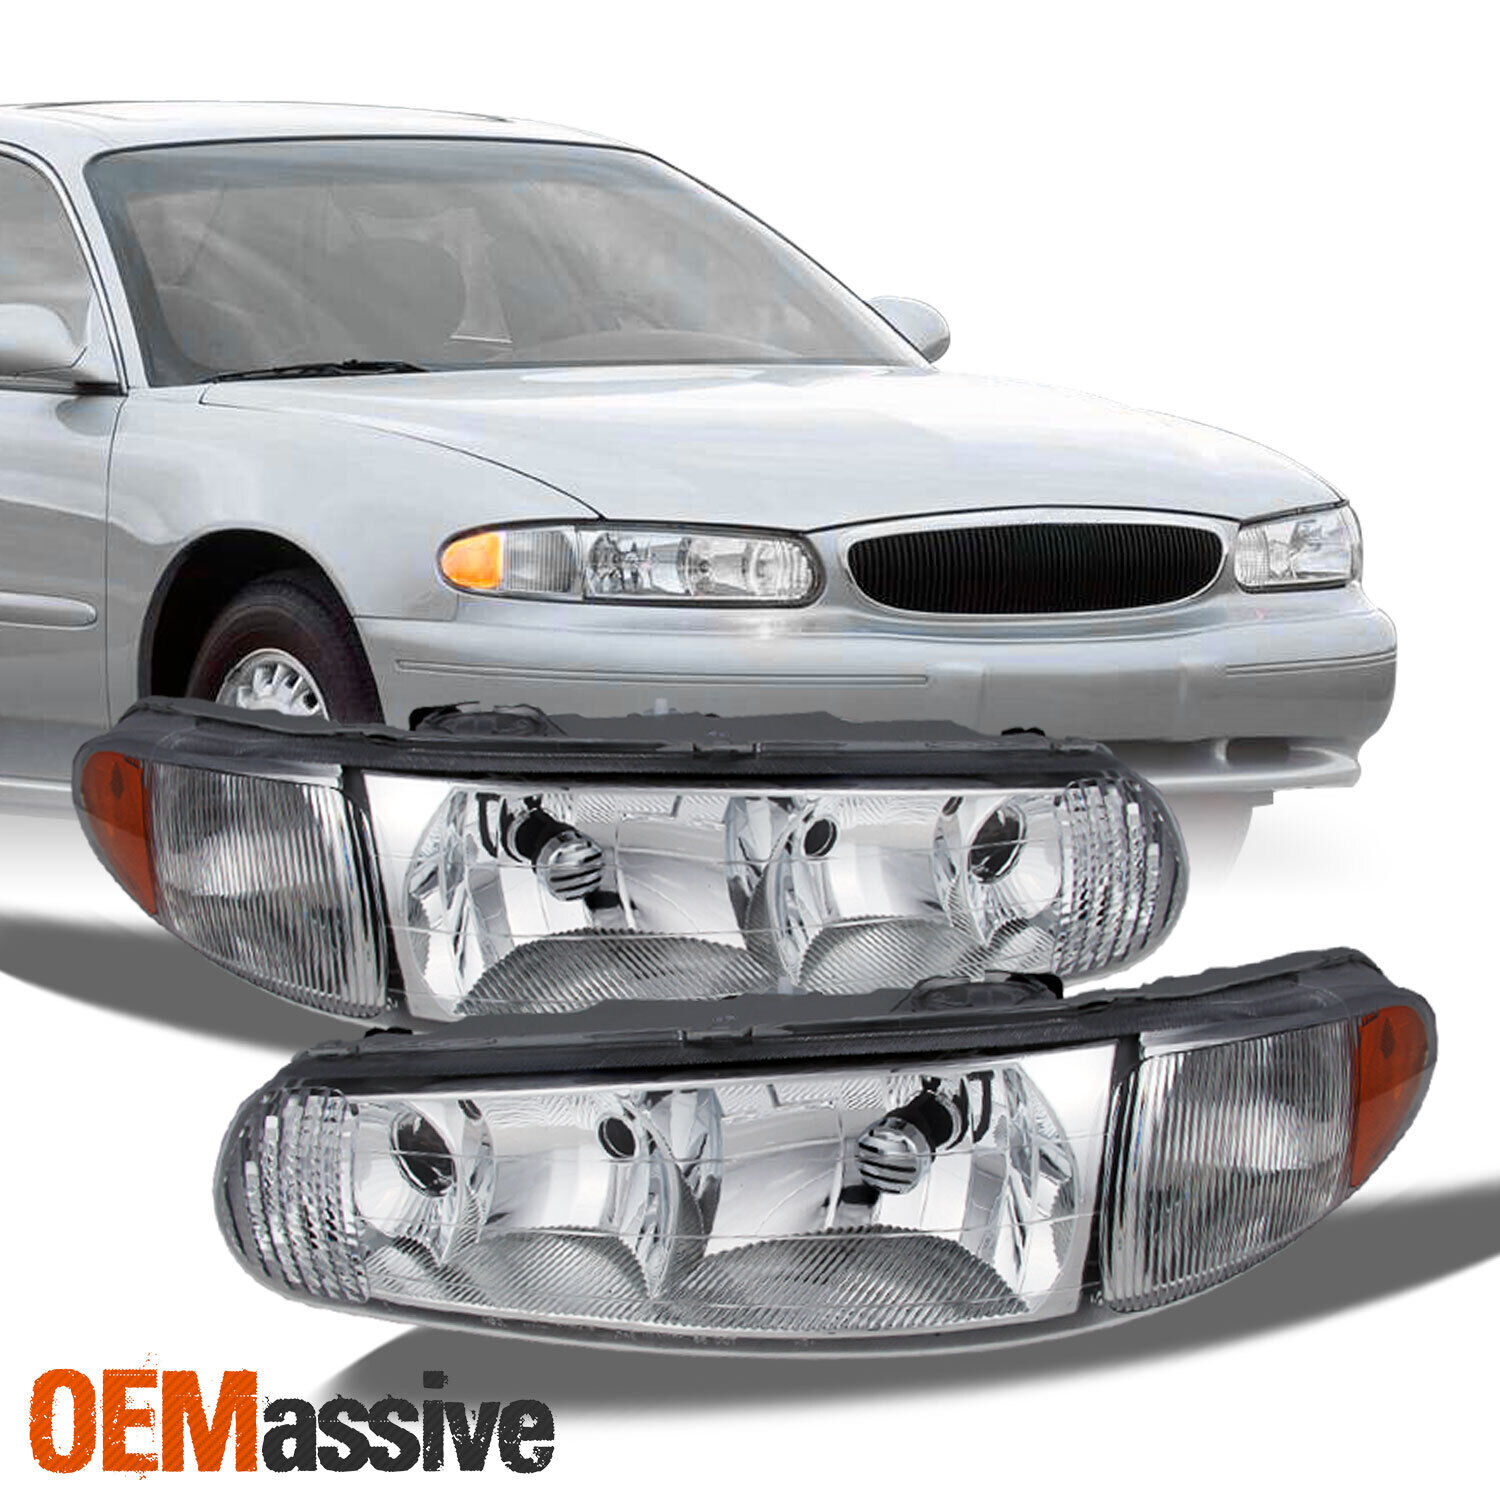 Fit 97-05 Buick Century/Regal Replacement Headlights Headlamps L+R 1997-2005